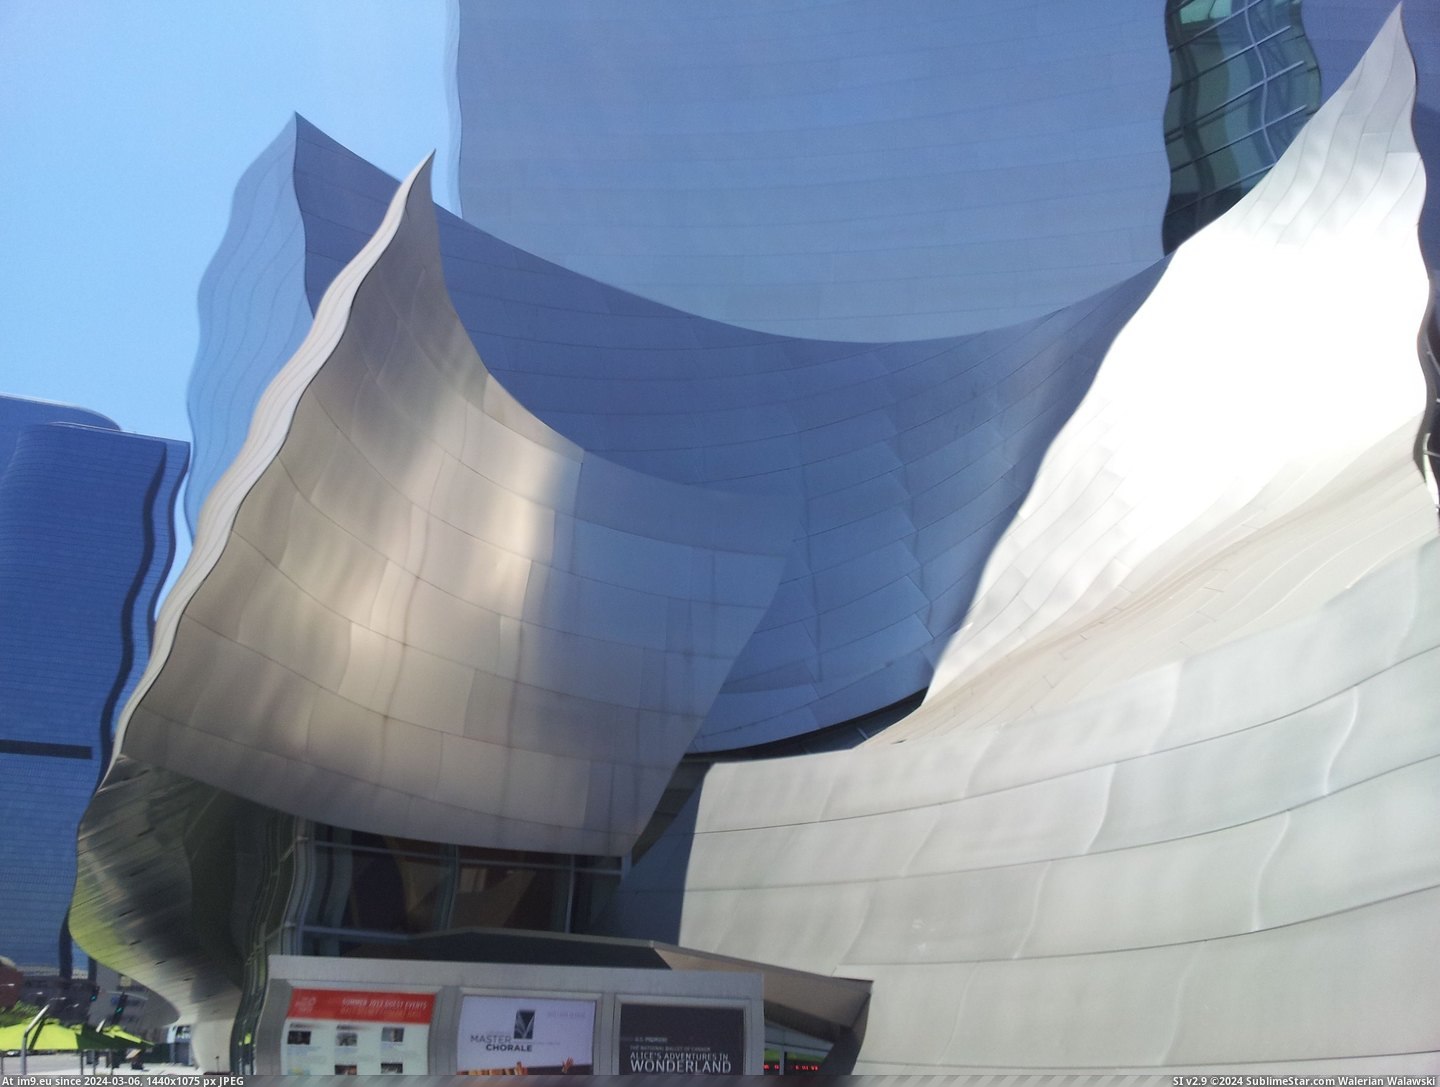 #Picture #Disney #Concert #Vibrate #Walt #Phone #Hall [Pics] I tried to take a picture of the Walt Disney Concert Hall when my phone started to vibrate Pic. (Изображение из альбом My r/PICS favs))